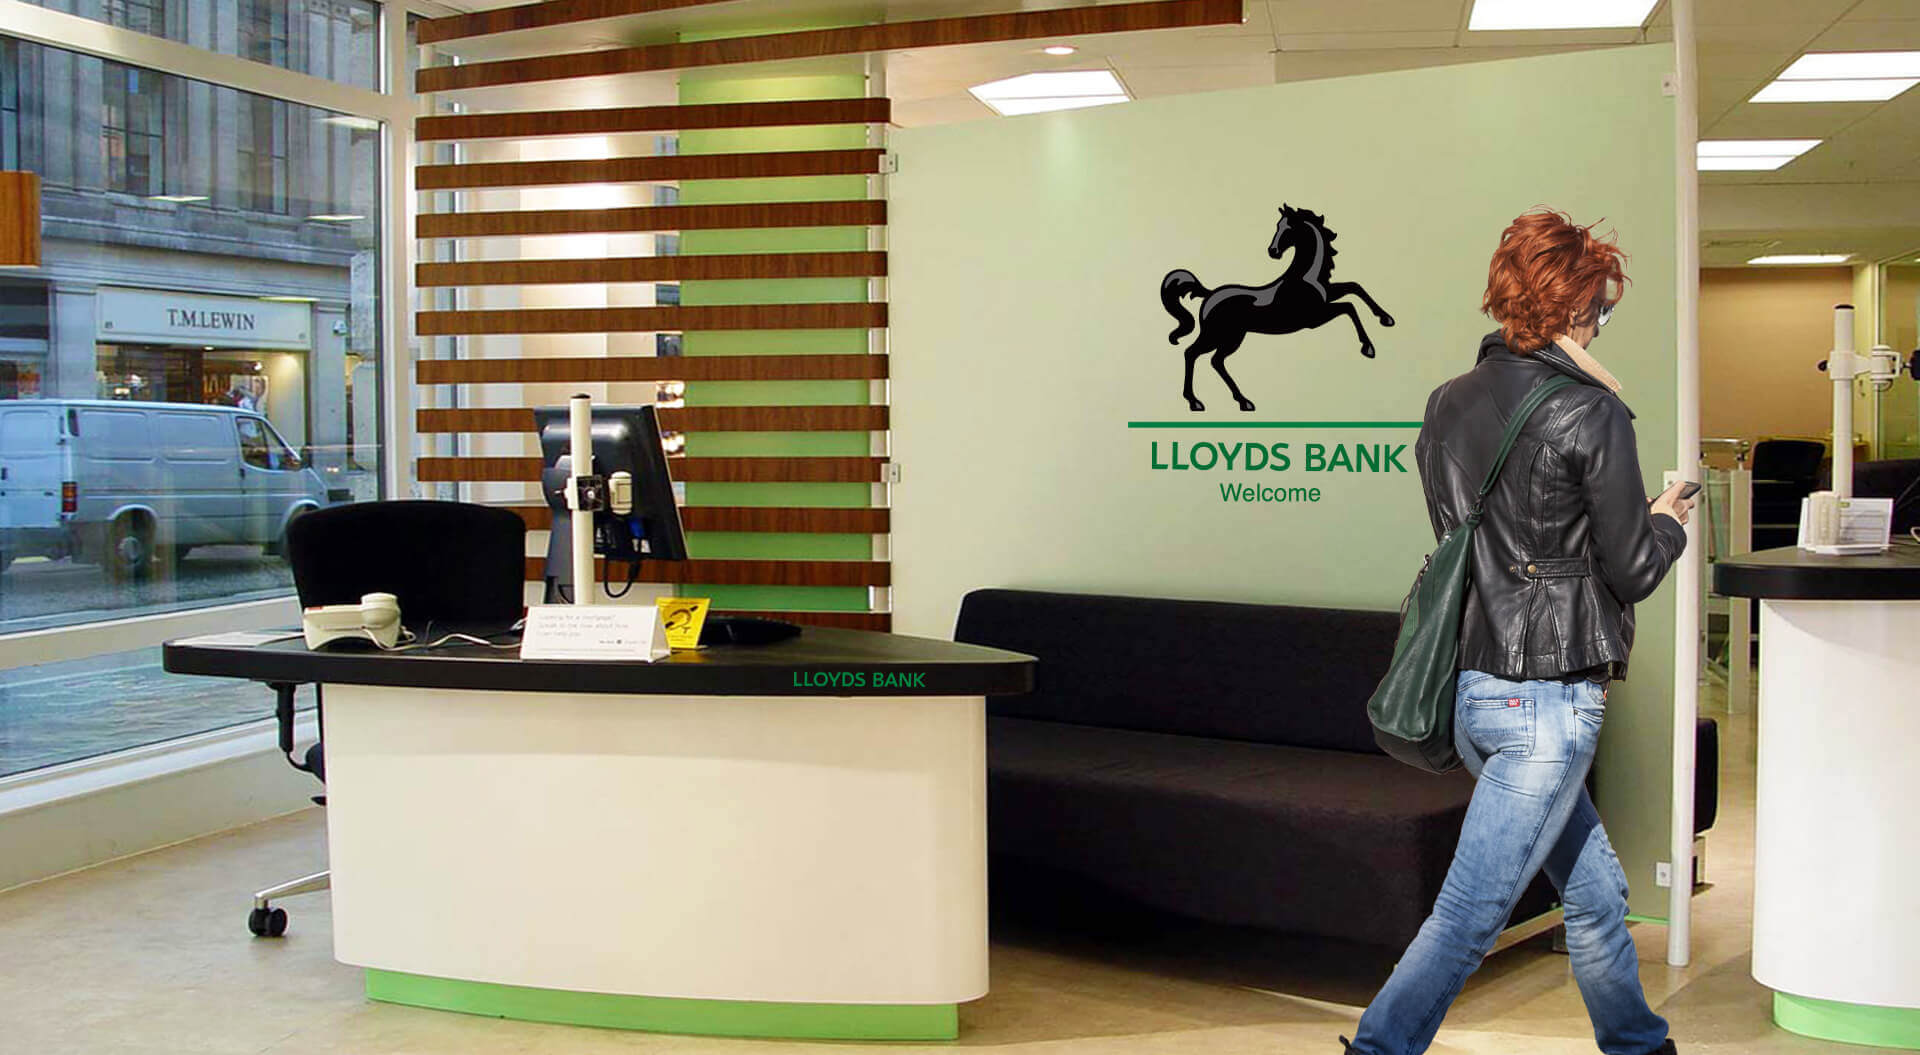 Lloyds Bank Reception point at the entrance of the branch - Branding